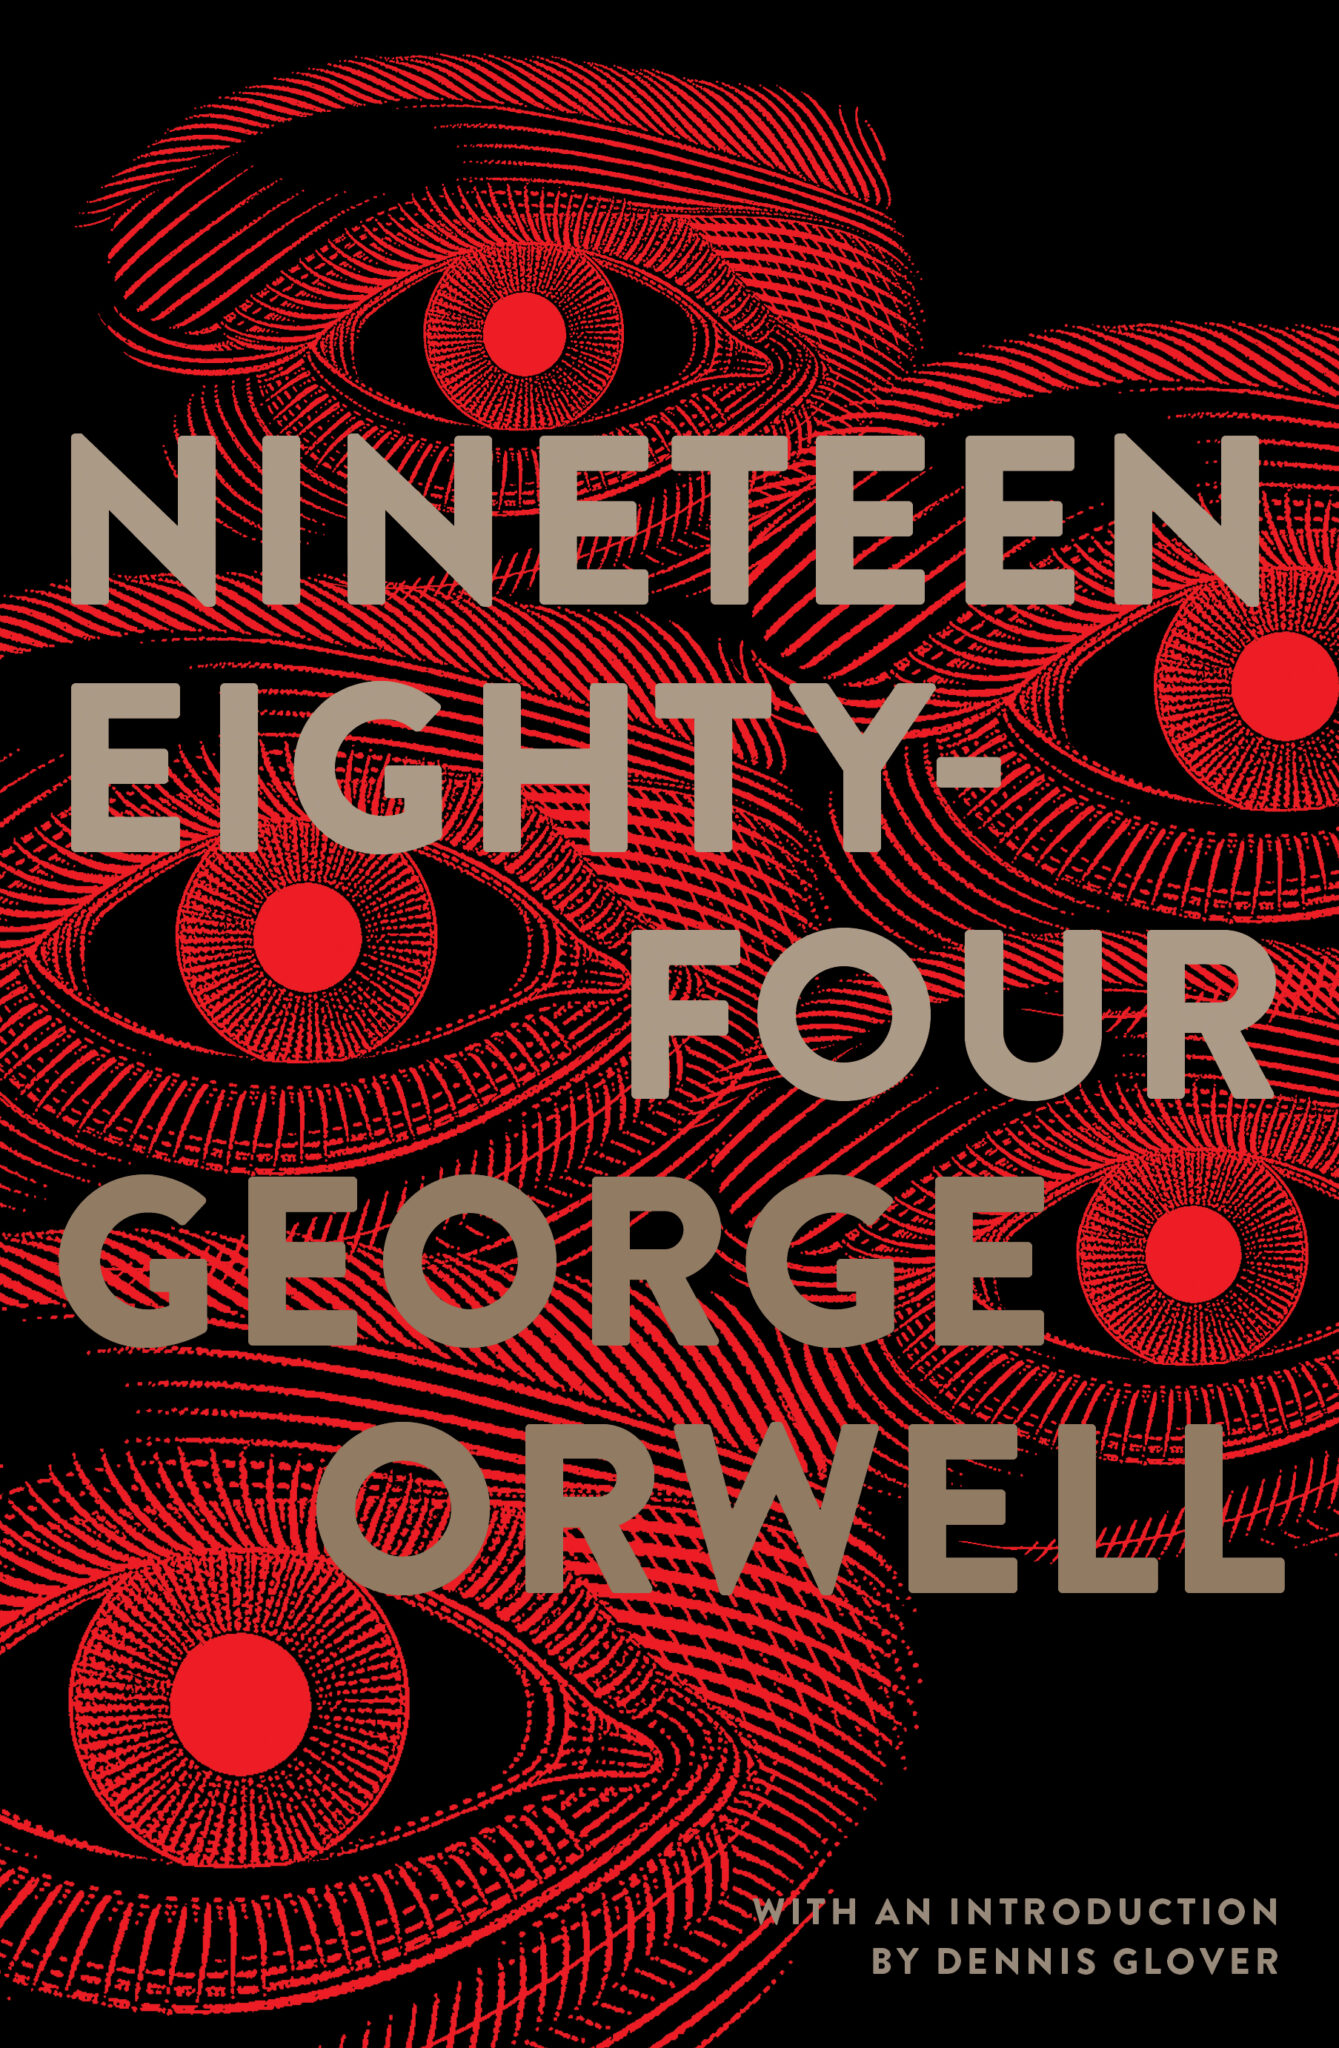 Read The First Reviews Of George Orwell S Nineteen Eighty Four ‹ Literary Hub